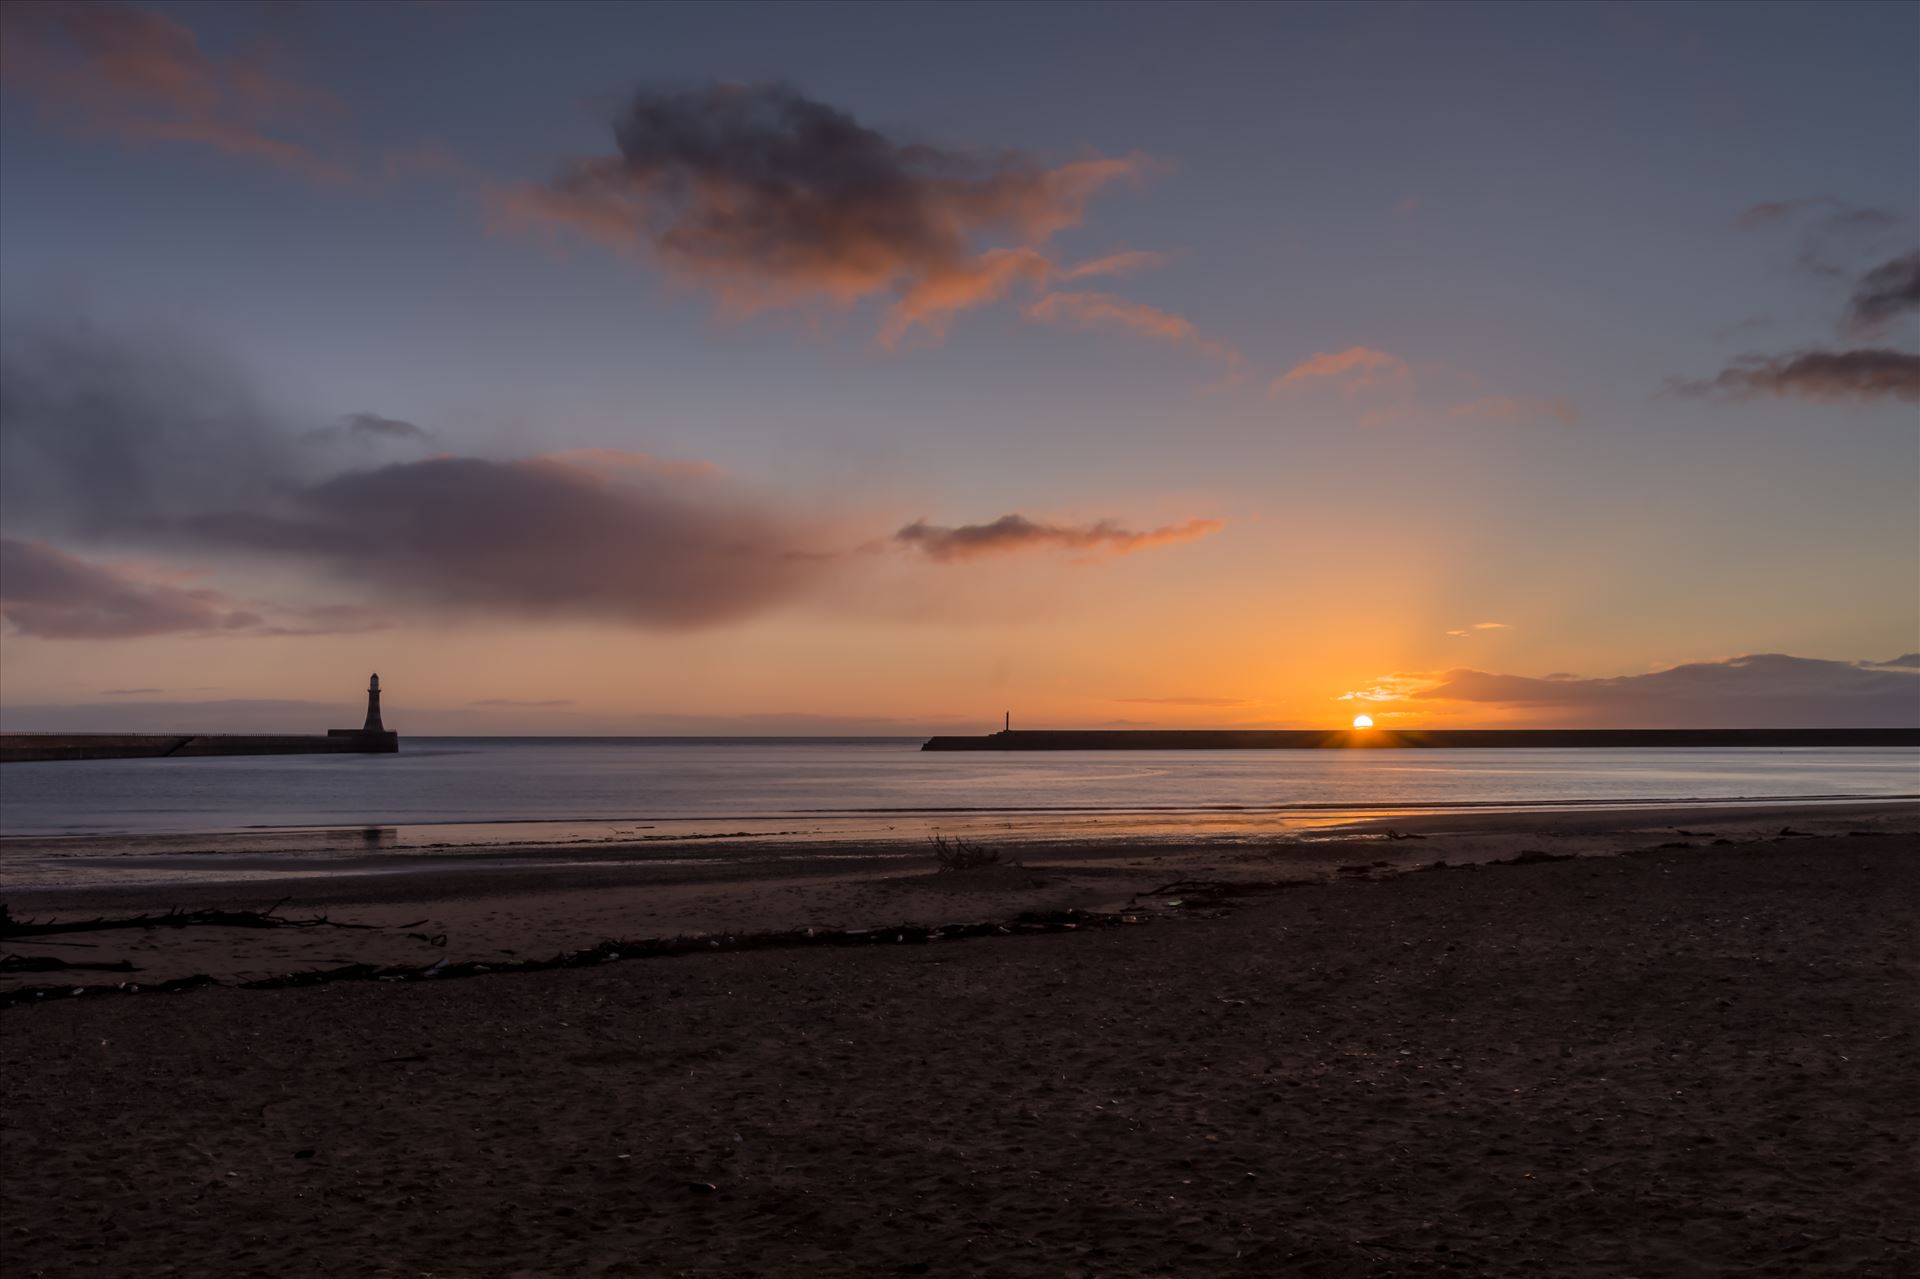 Roker pier at sunrise The first sunrise of 2018 at Roker Pier, Sunderland by philreay